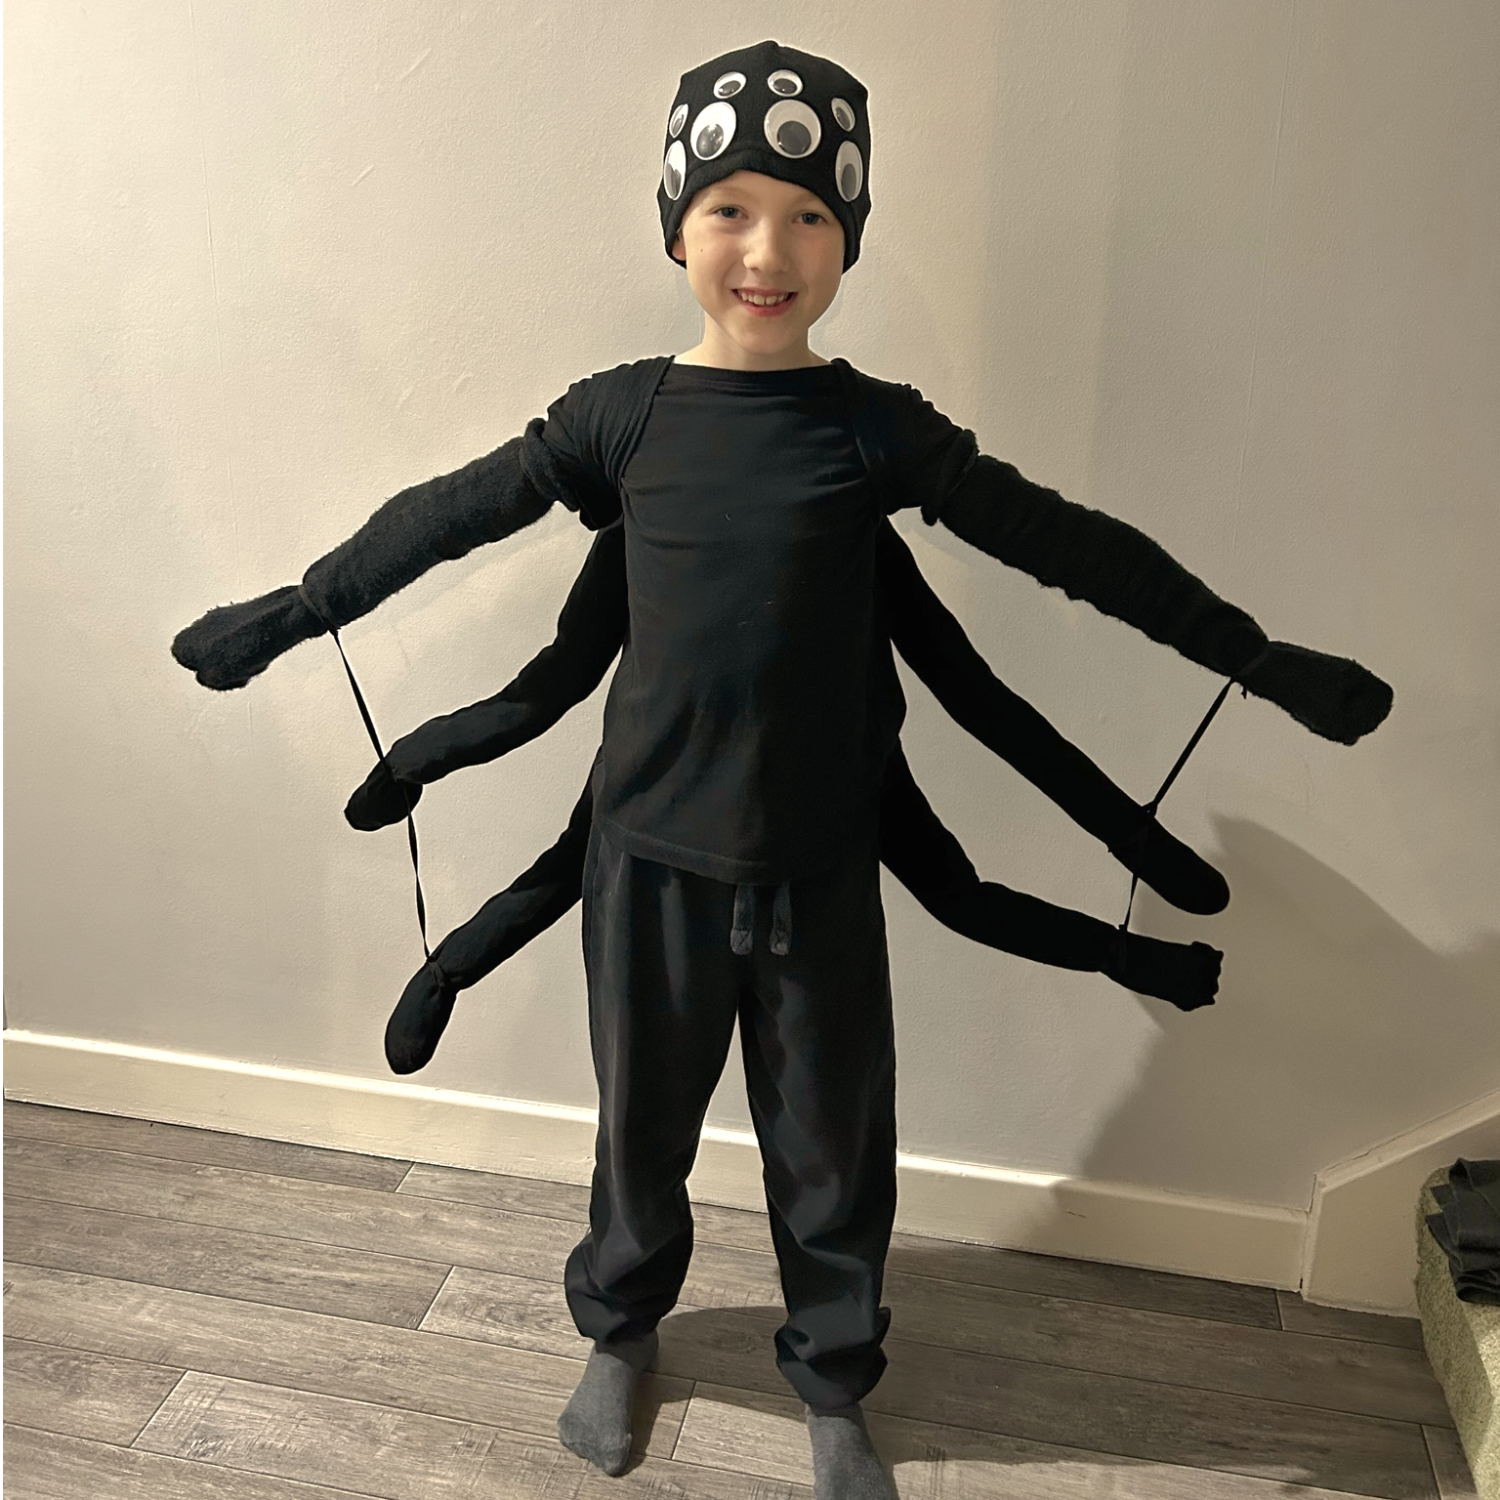 Gabe in his homemade spider costume for halloween